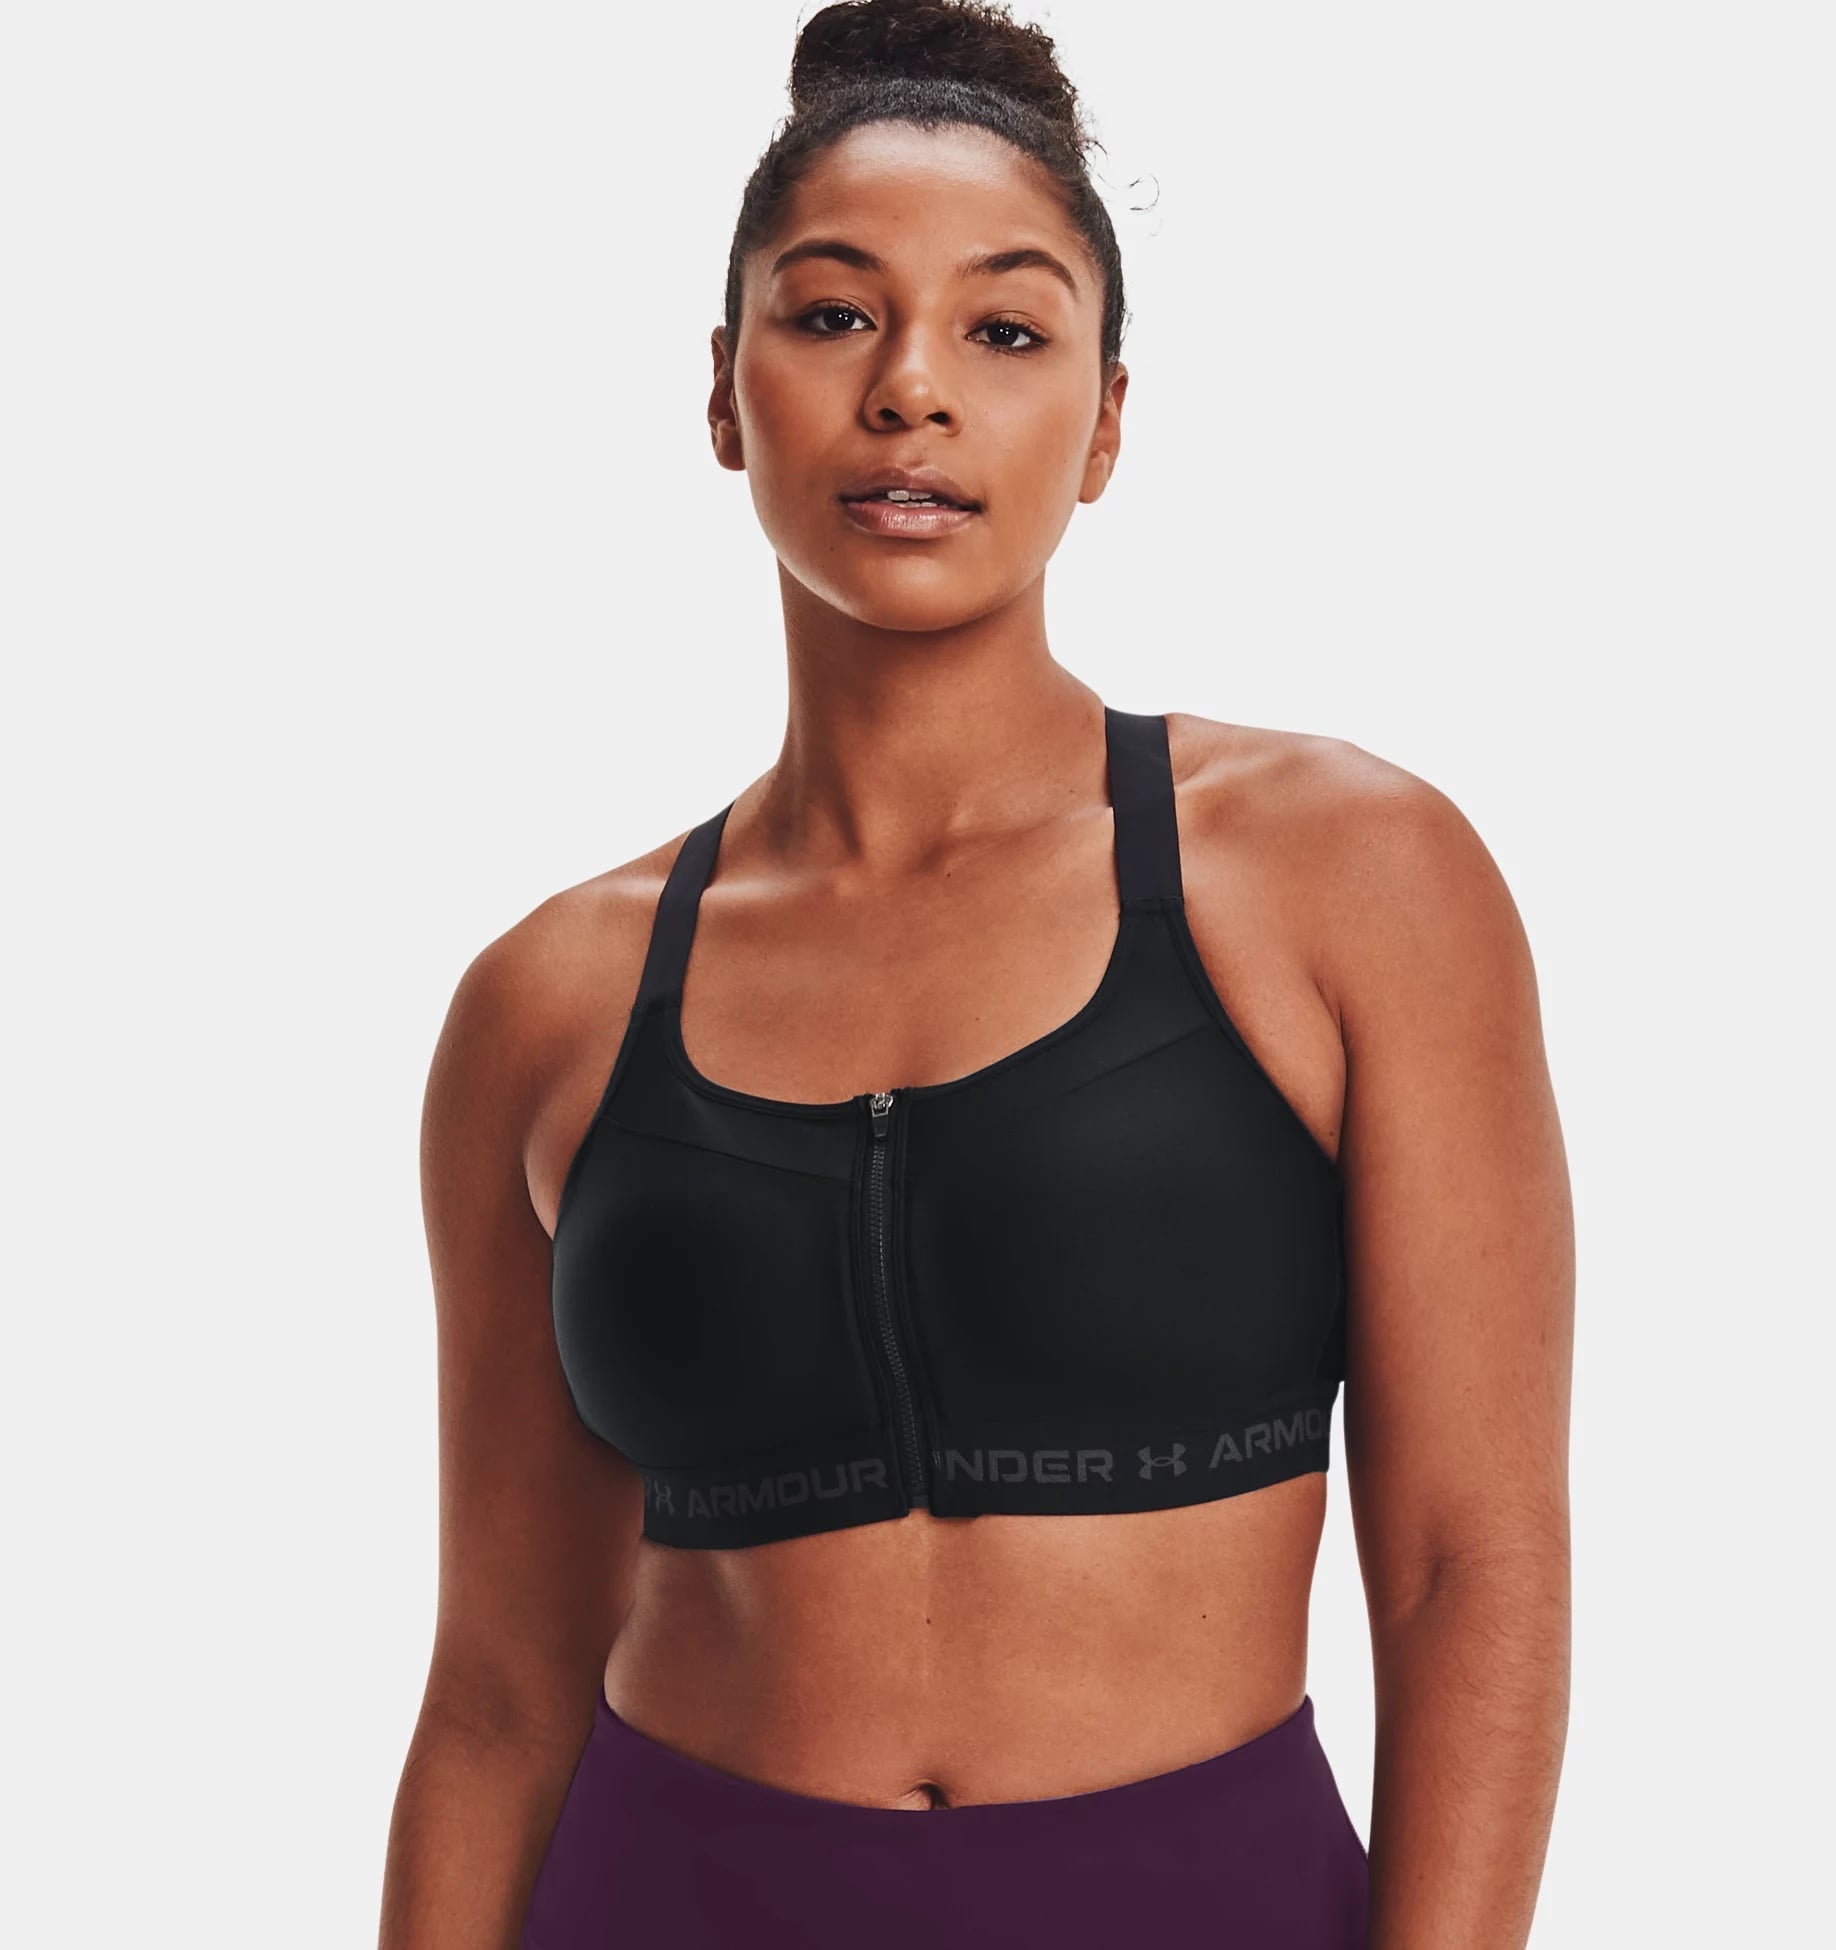 Best Sports Bras For Small Boobs